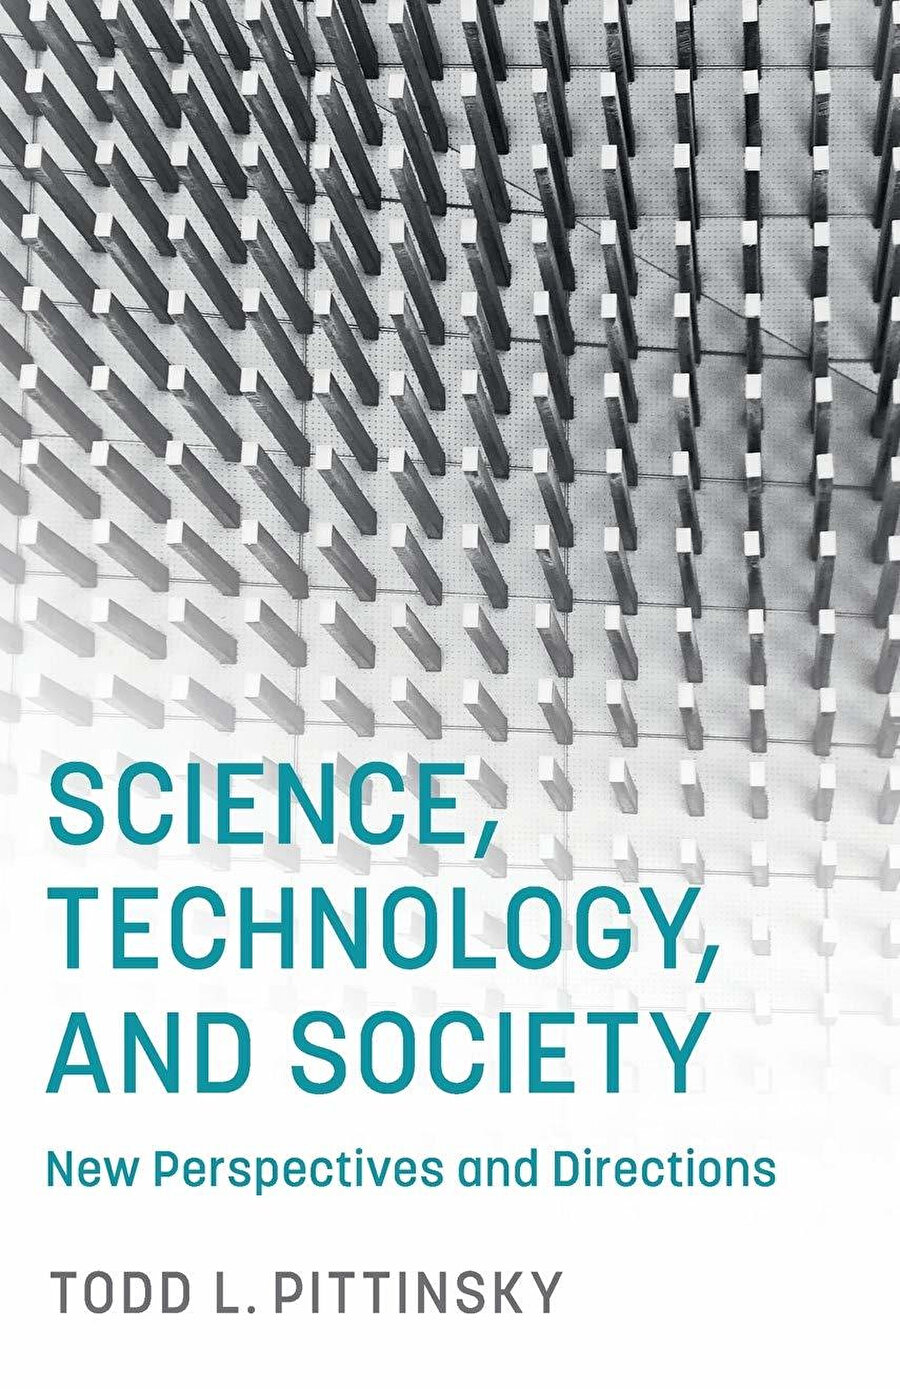 Science, Technology, and Society: New Perspectives and Directions, ed. Todd L. Pittinsky,Cambridge University Press, 